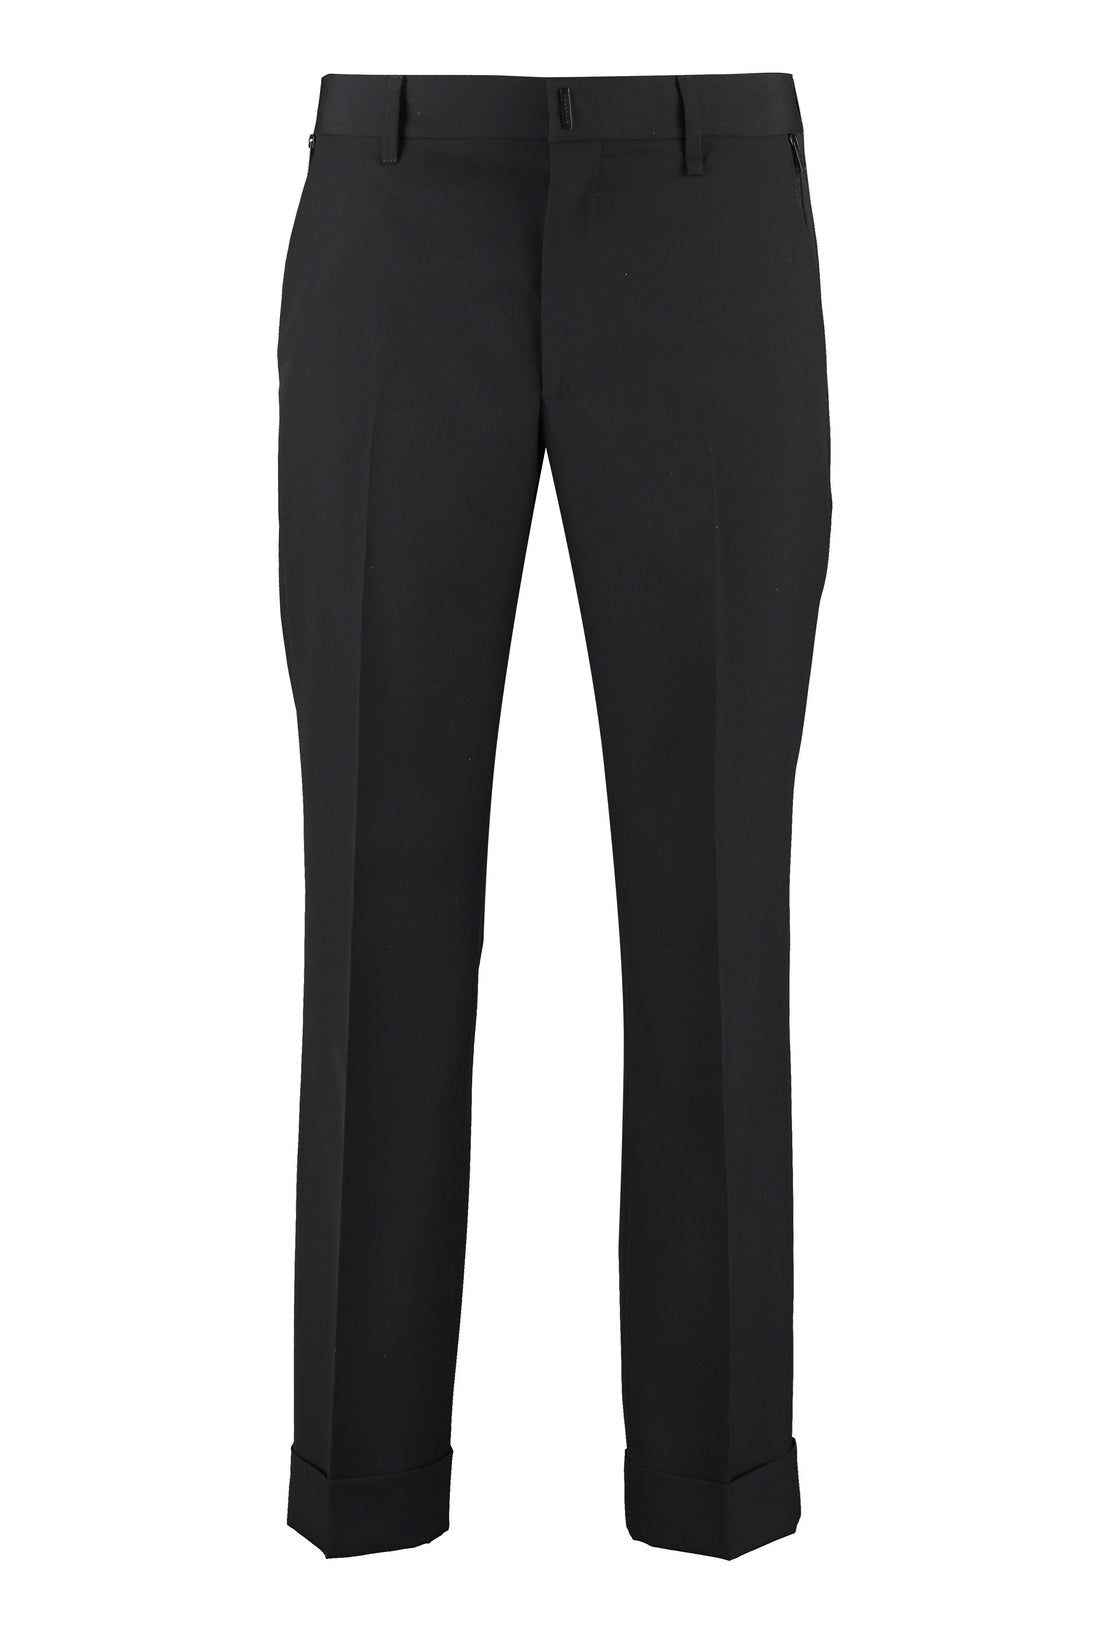 Givenchy-OUTLET-SALE-Slim wool trousers-ARCHIVIST